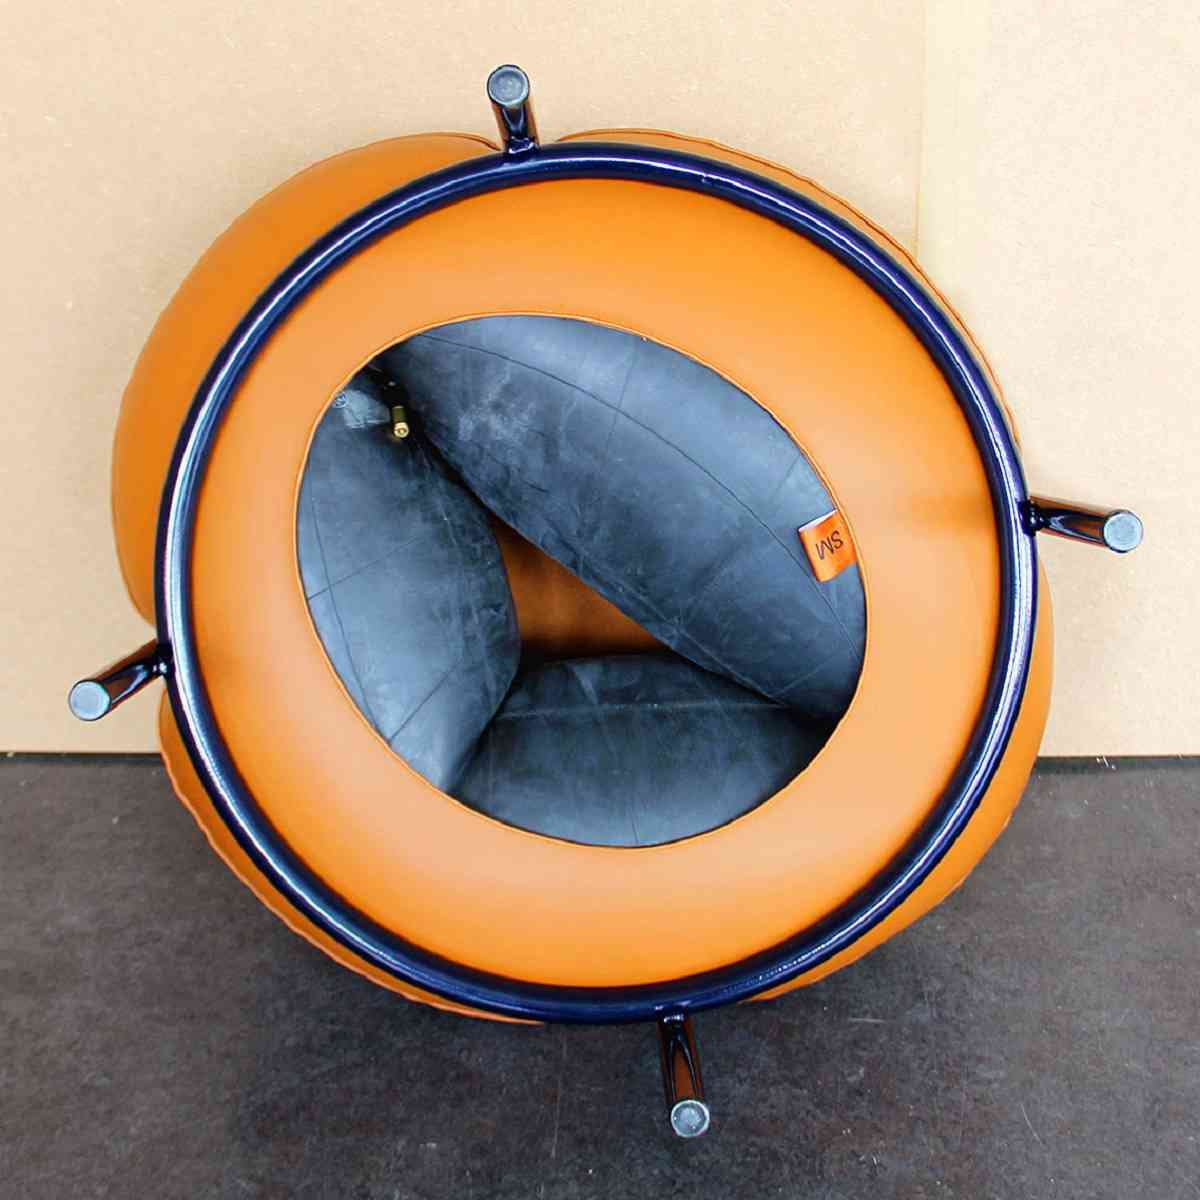 Inflate Series. Exploration of new 'Greener' upholstery methods in manufacture. - Sofia Matheou